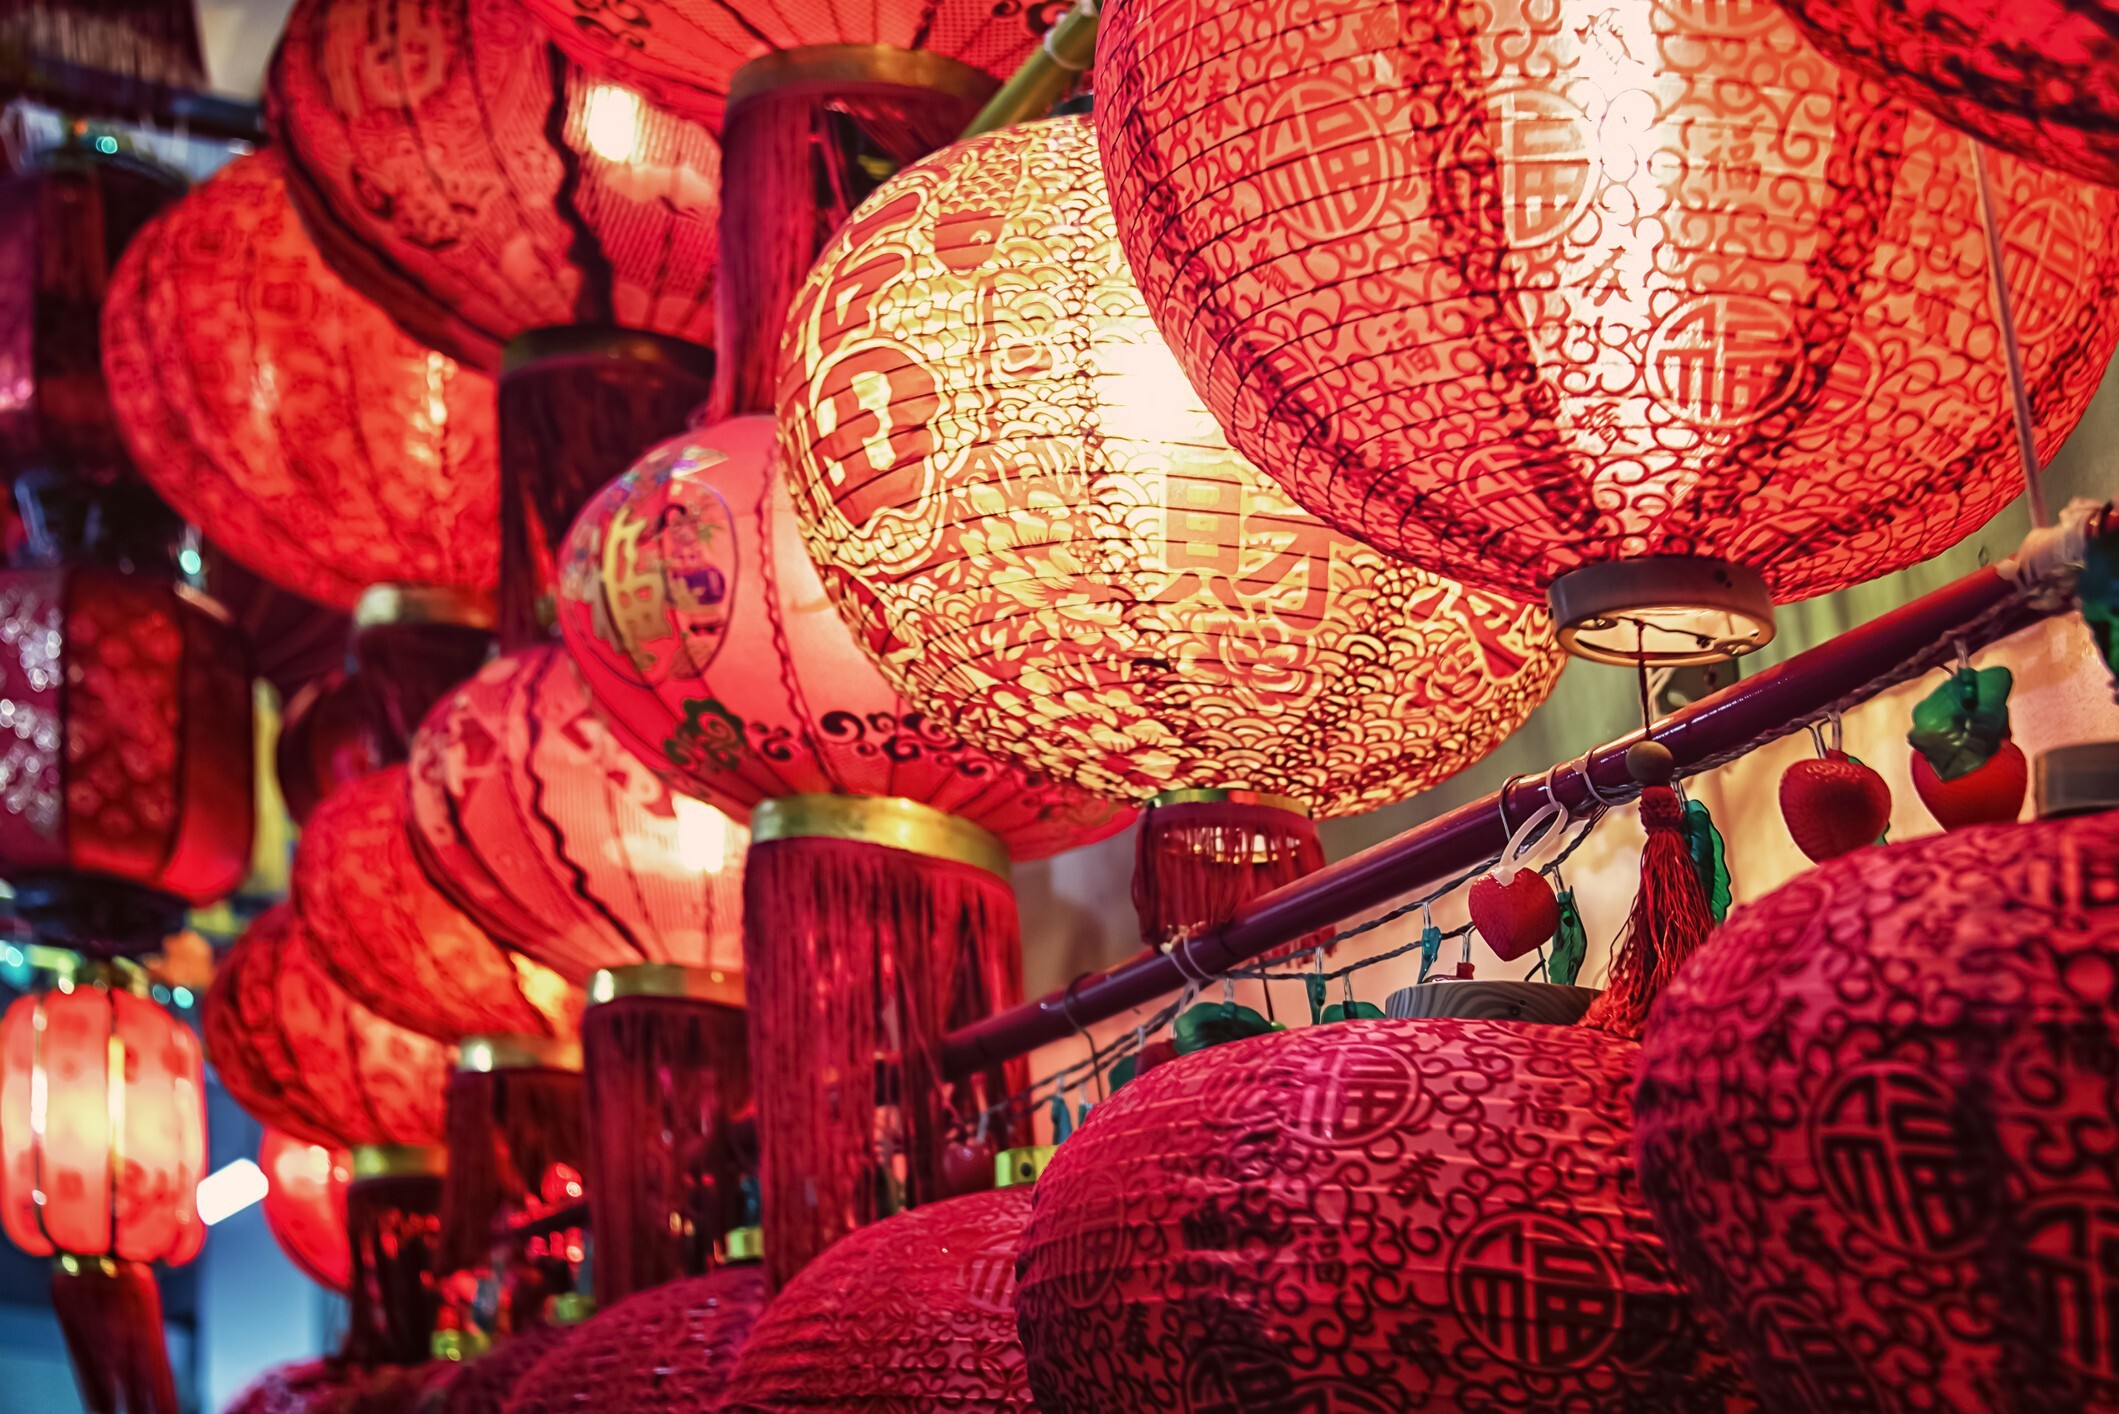 When it comes to Lunar New Year, every home needs some big red balls